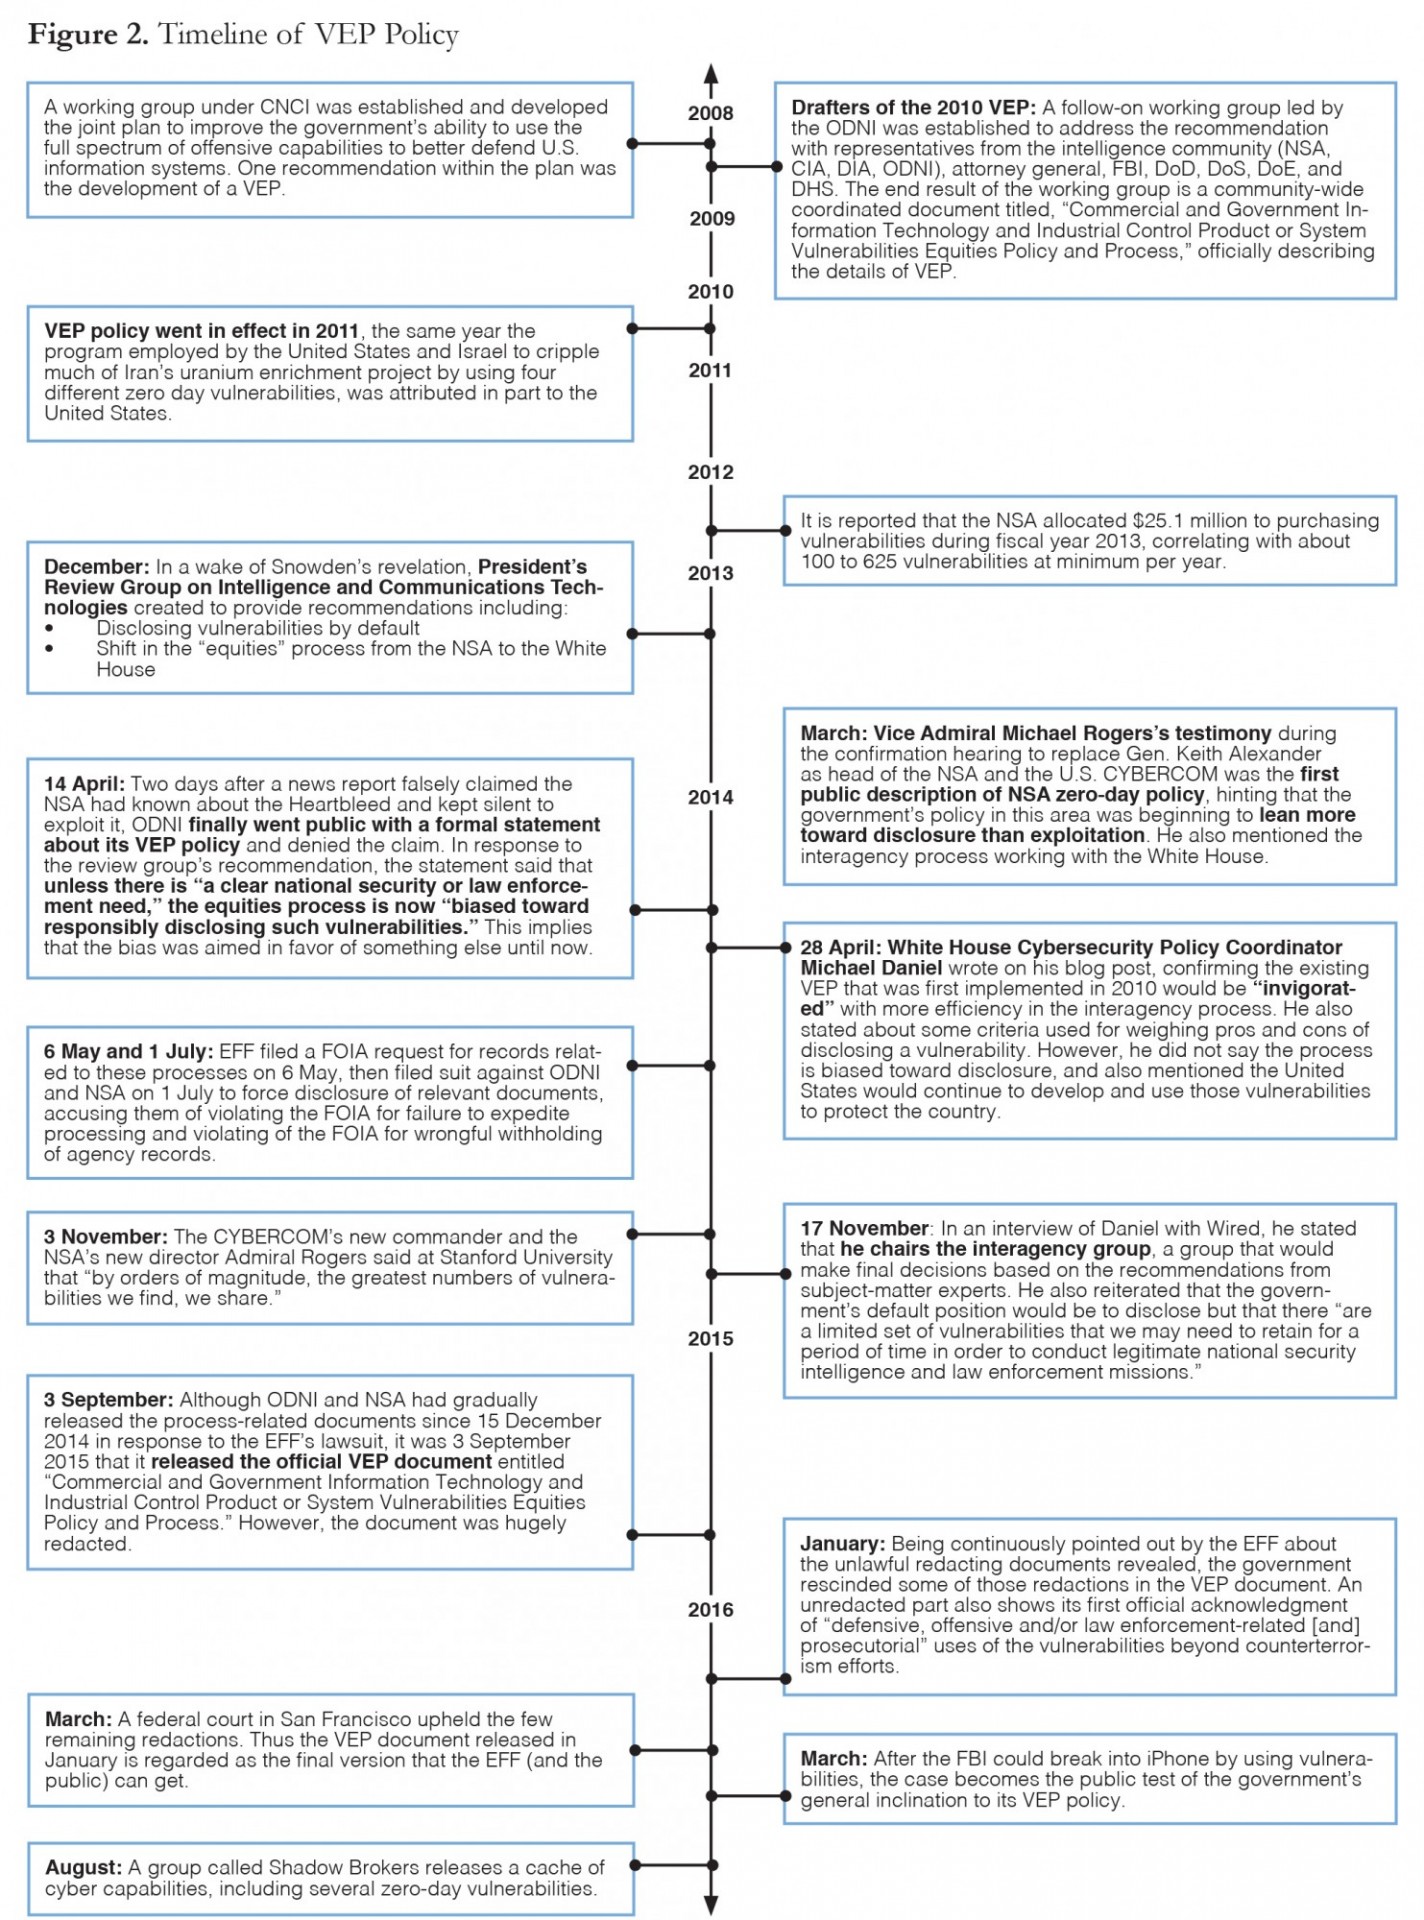 Timeline of VEP Policy